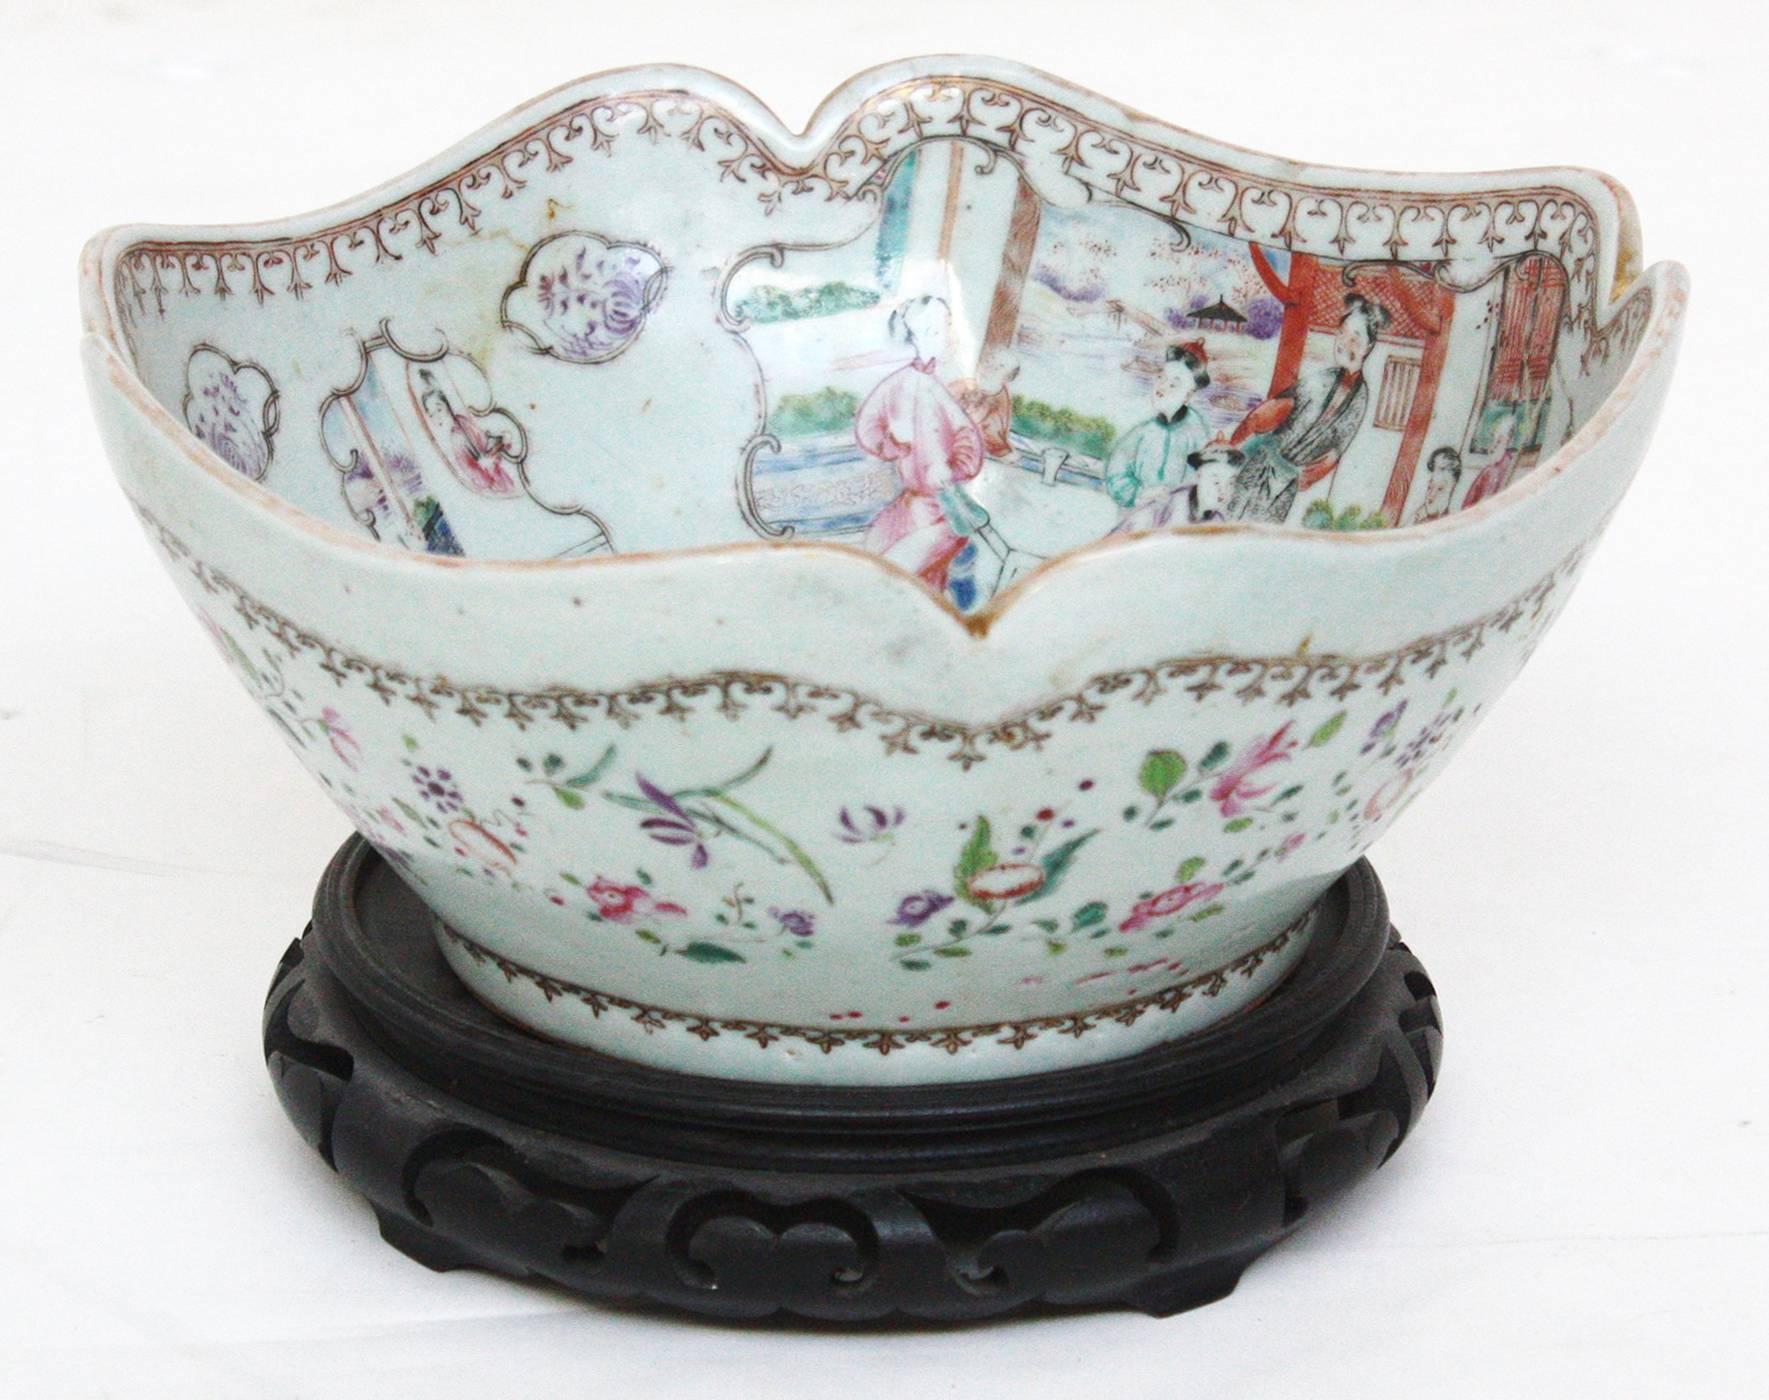 An early 19th century Chinese export porcelain bowl with a beautiful scalloped rim. Two large and two small interior panels depicting family scenes with children. Famillle rose coloration with a gilt spearhead border on inside rim of the bowl. On